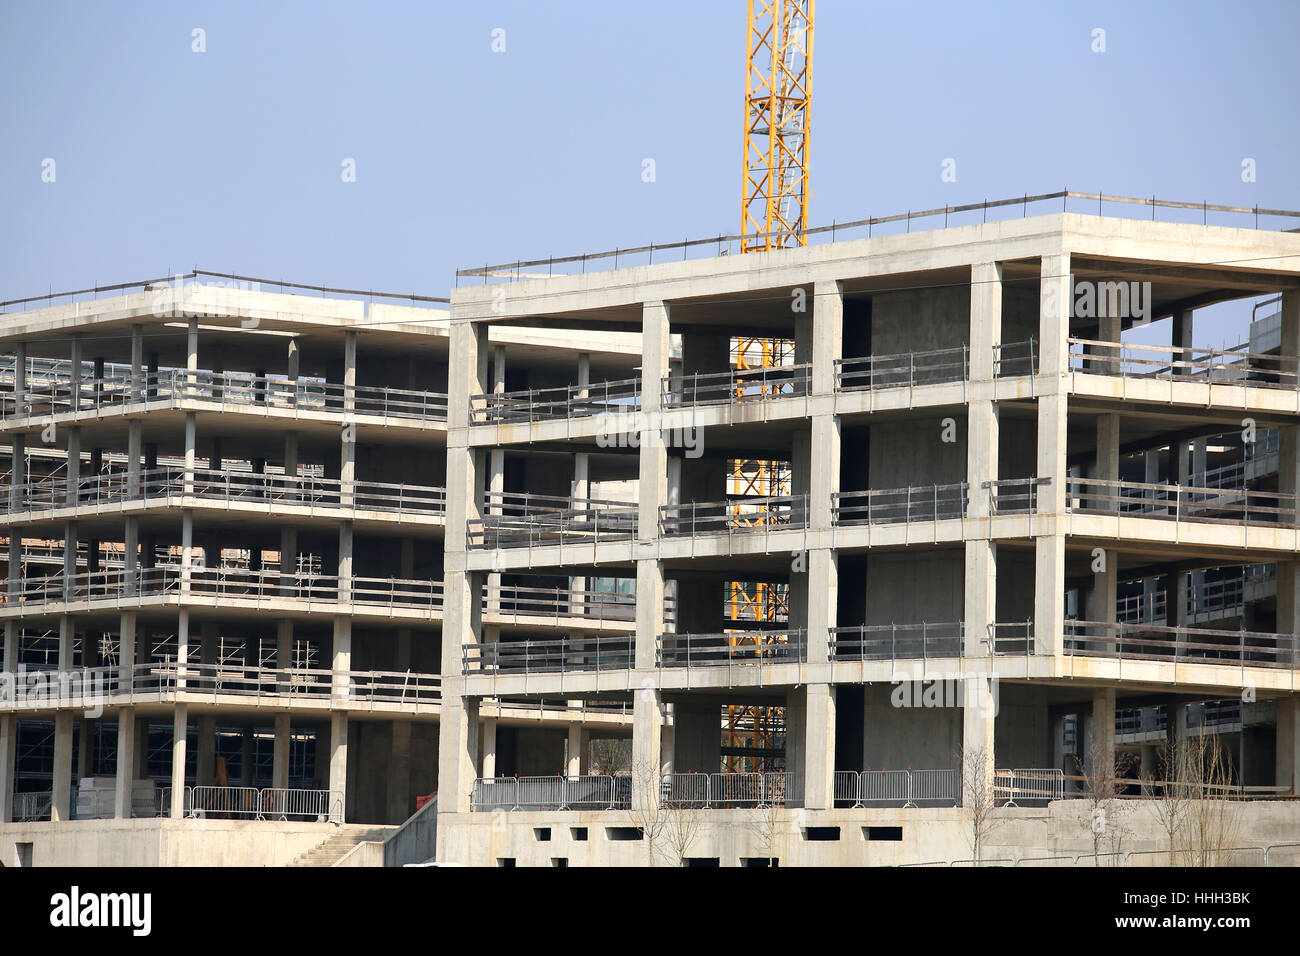 huge building under construction with reinforced concrete walls on the outskirts of the city Stock Photo